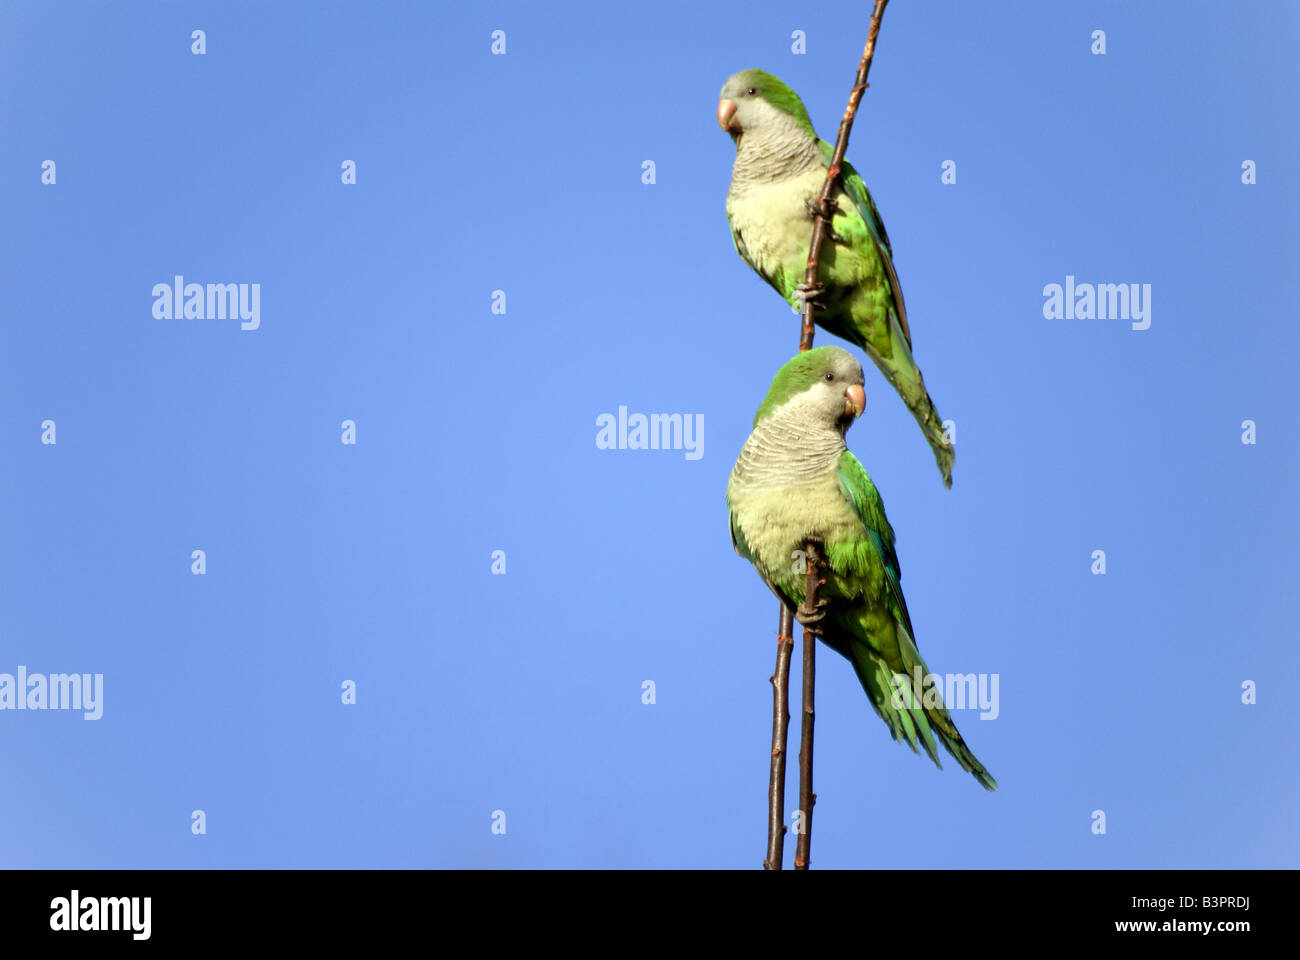 Green canaries Stock Photo